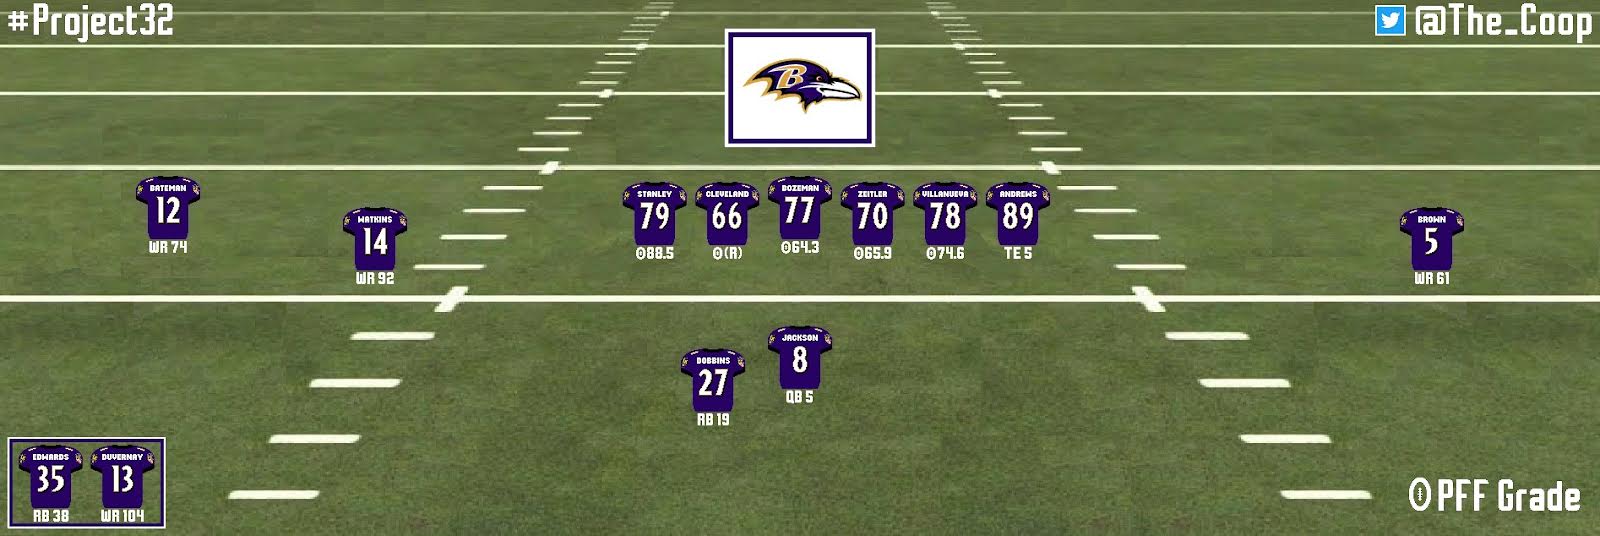 Baltimore Ravens 2021 projections